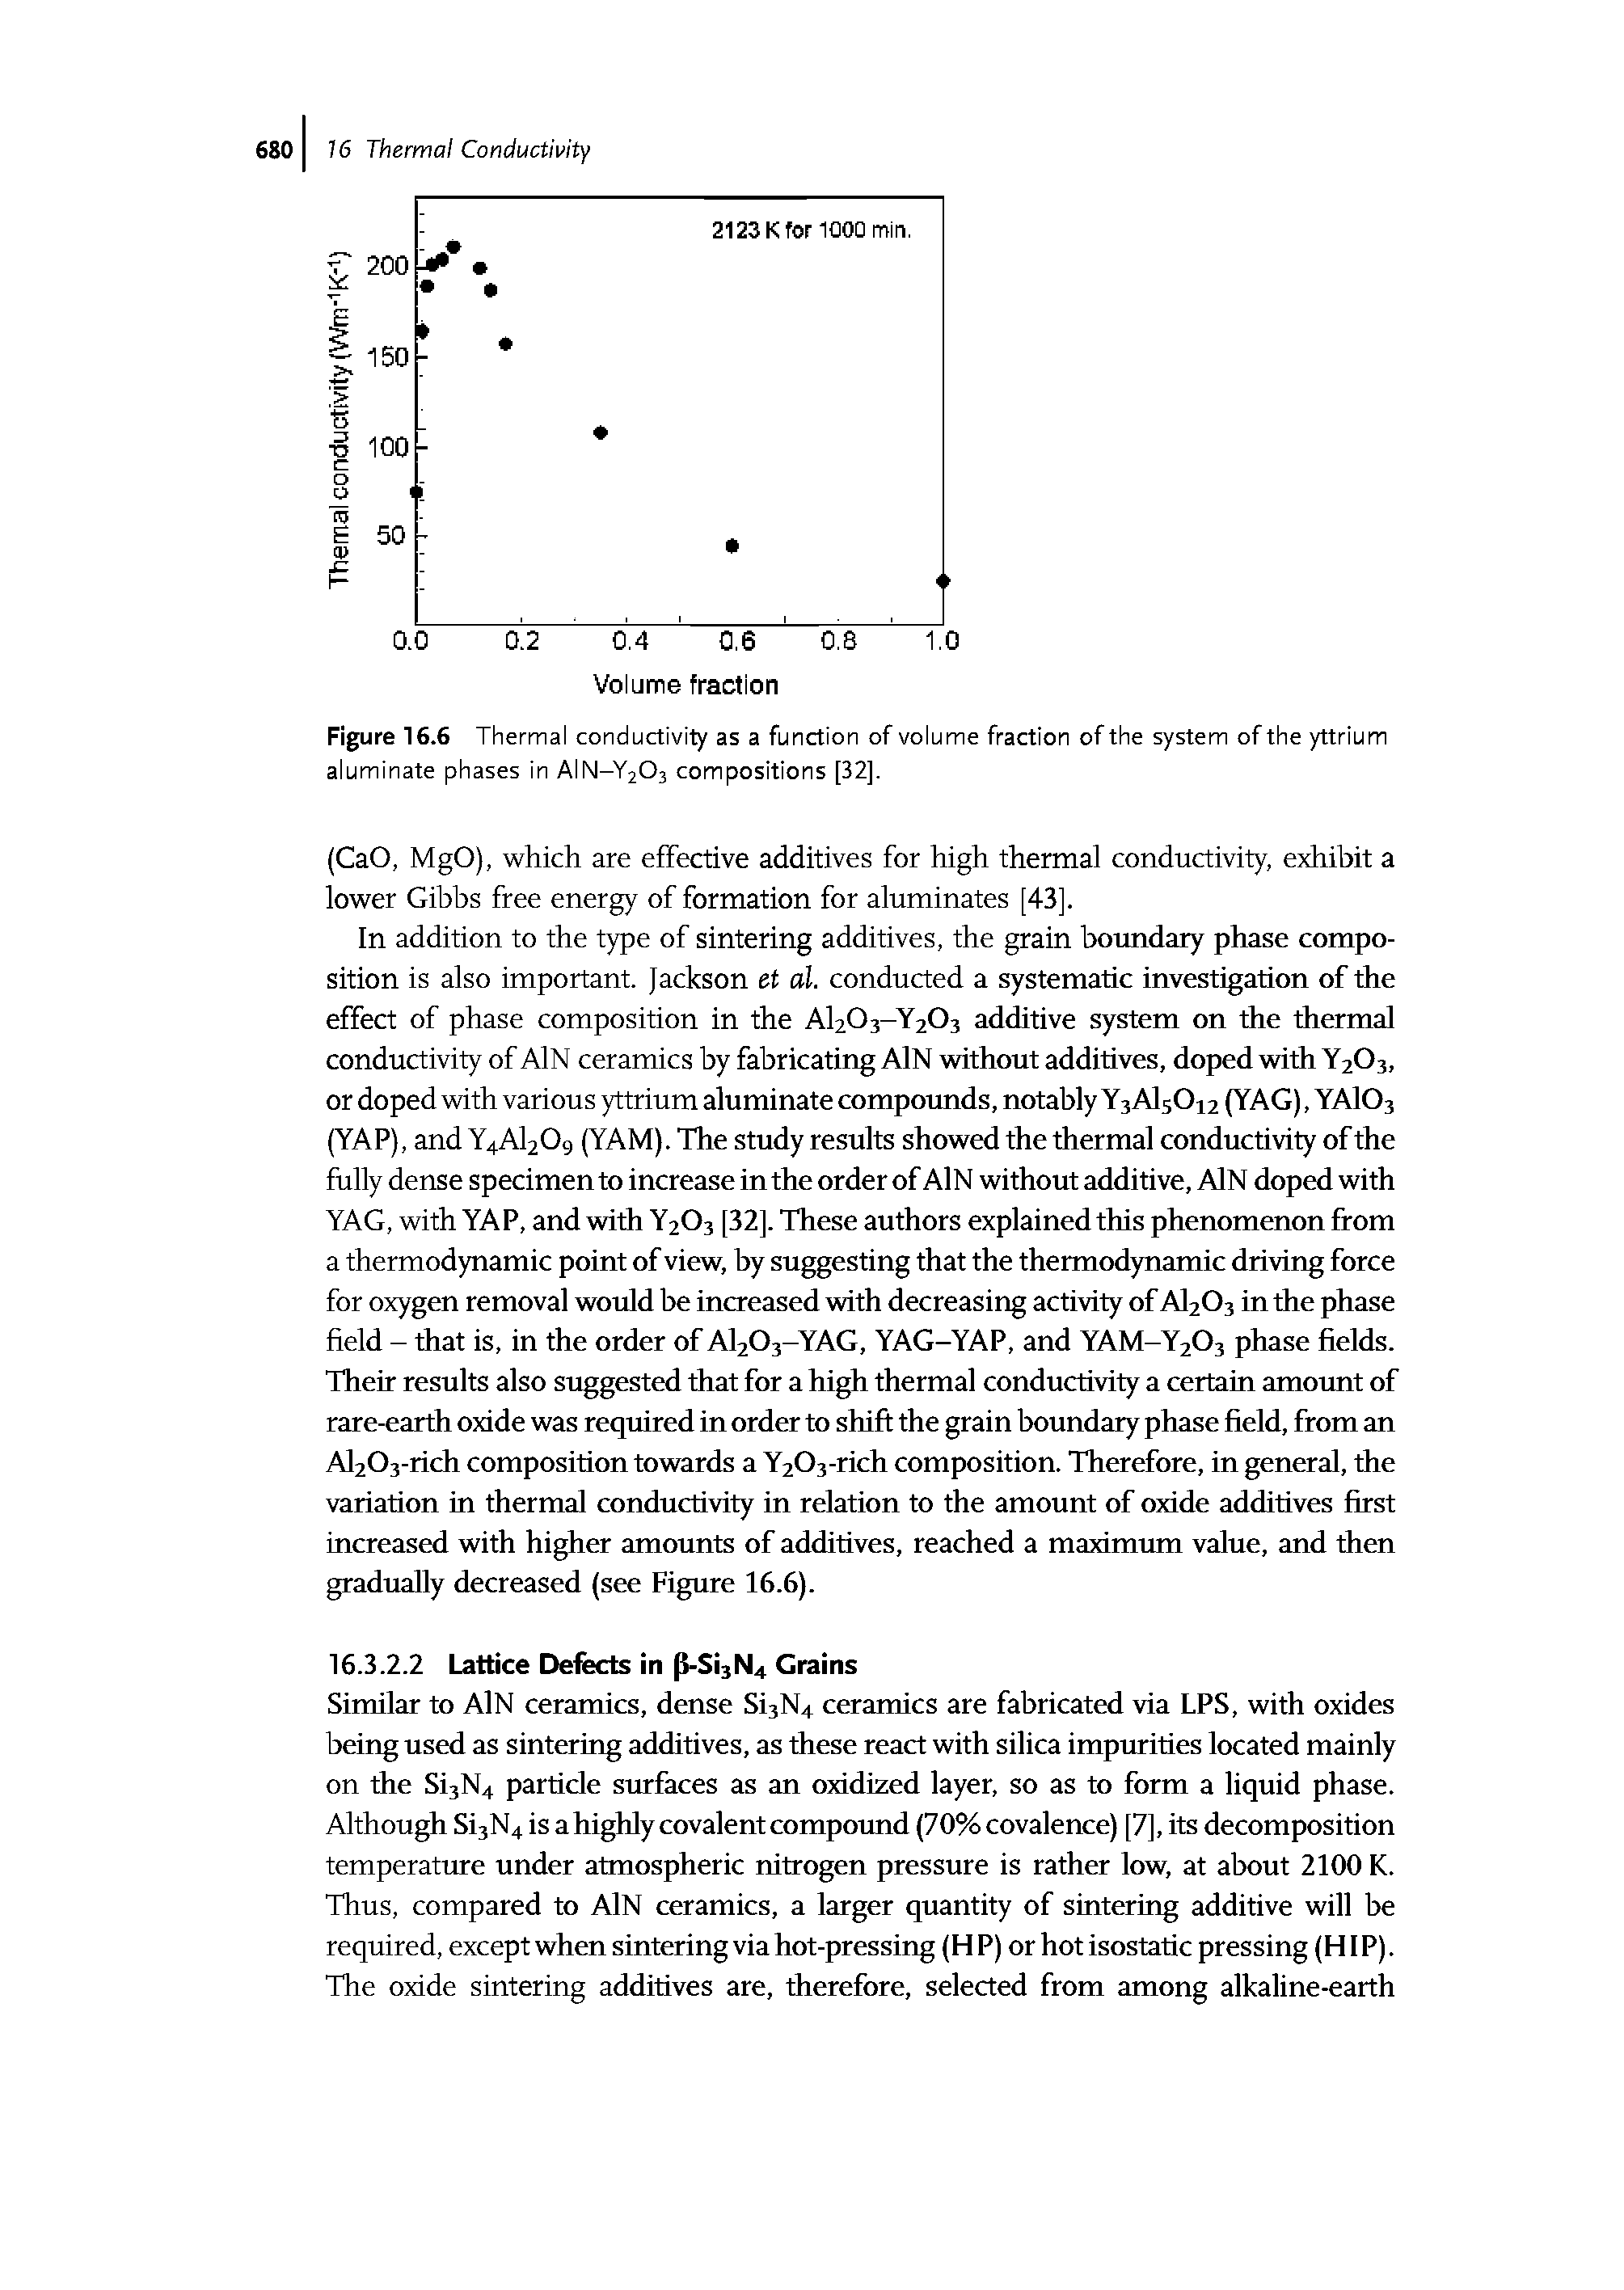 Figure 16.6 Thermal conductivity as a function of volume fraction of the system of the yttrium aluminate phases in AIN-Y2O3 compositions [32].